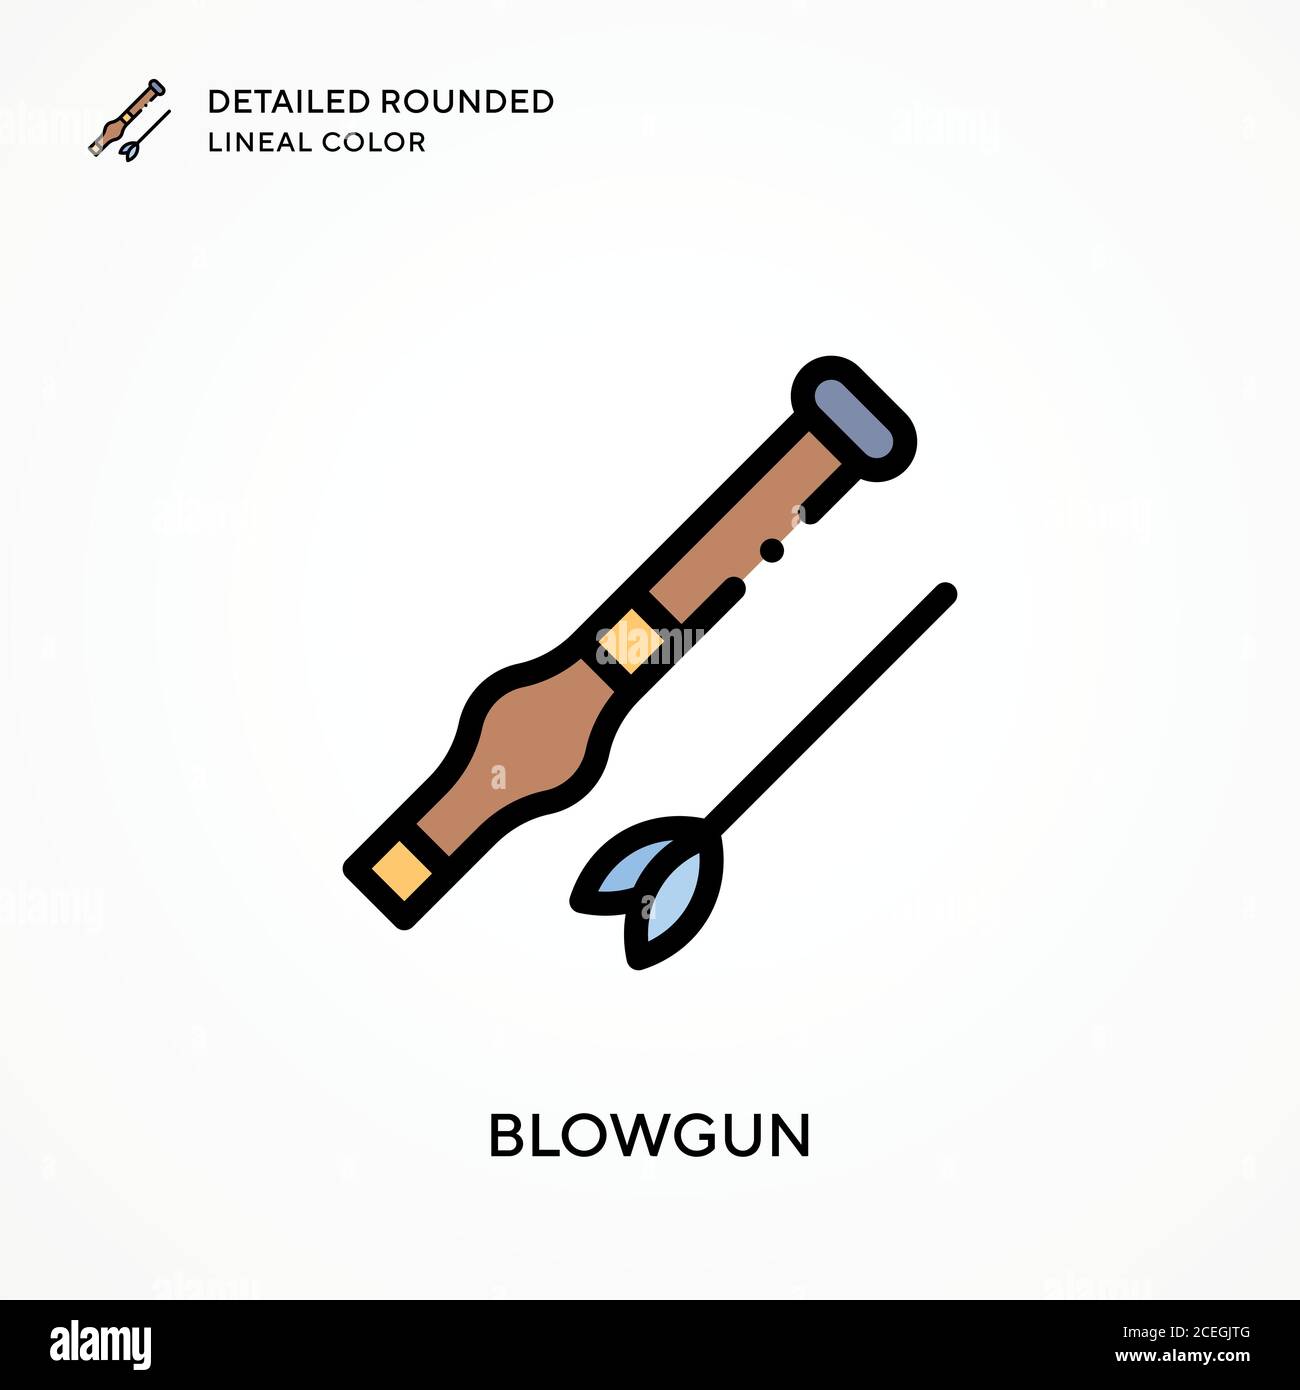 Blowgun detailed rounded lineal color. Modern vector illustration concepts. Easy to edit and customize. Stock Vector